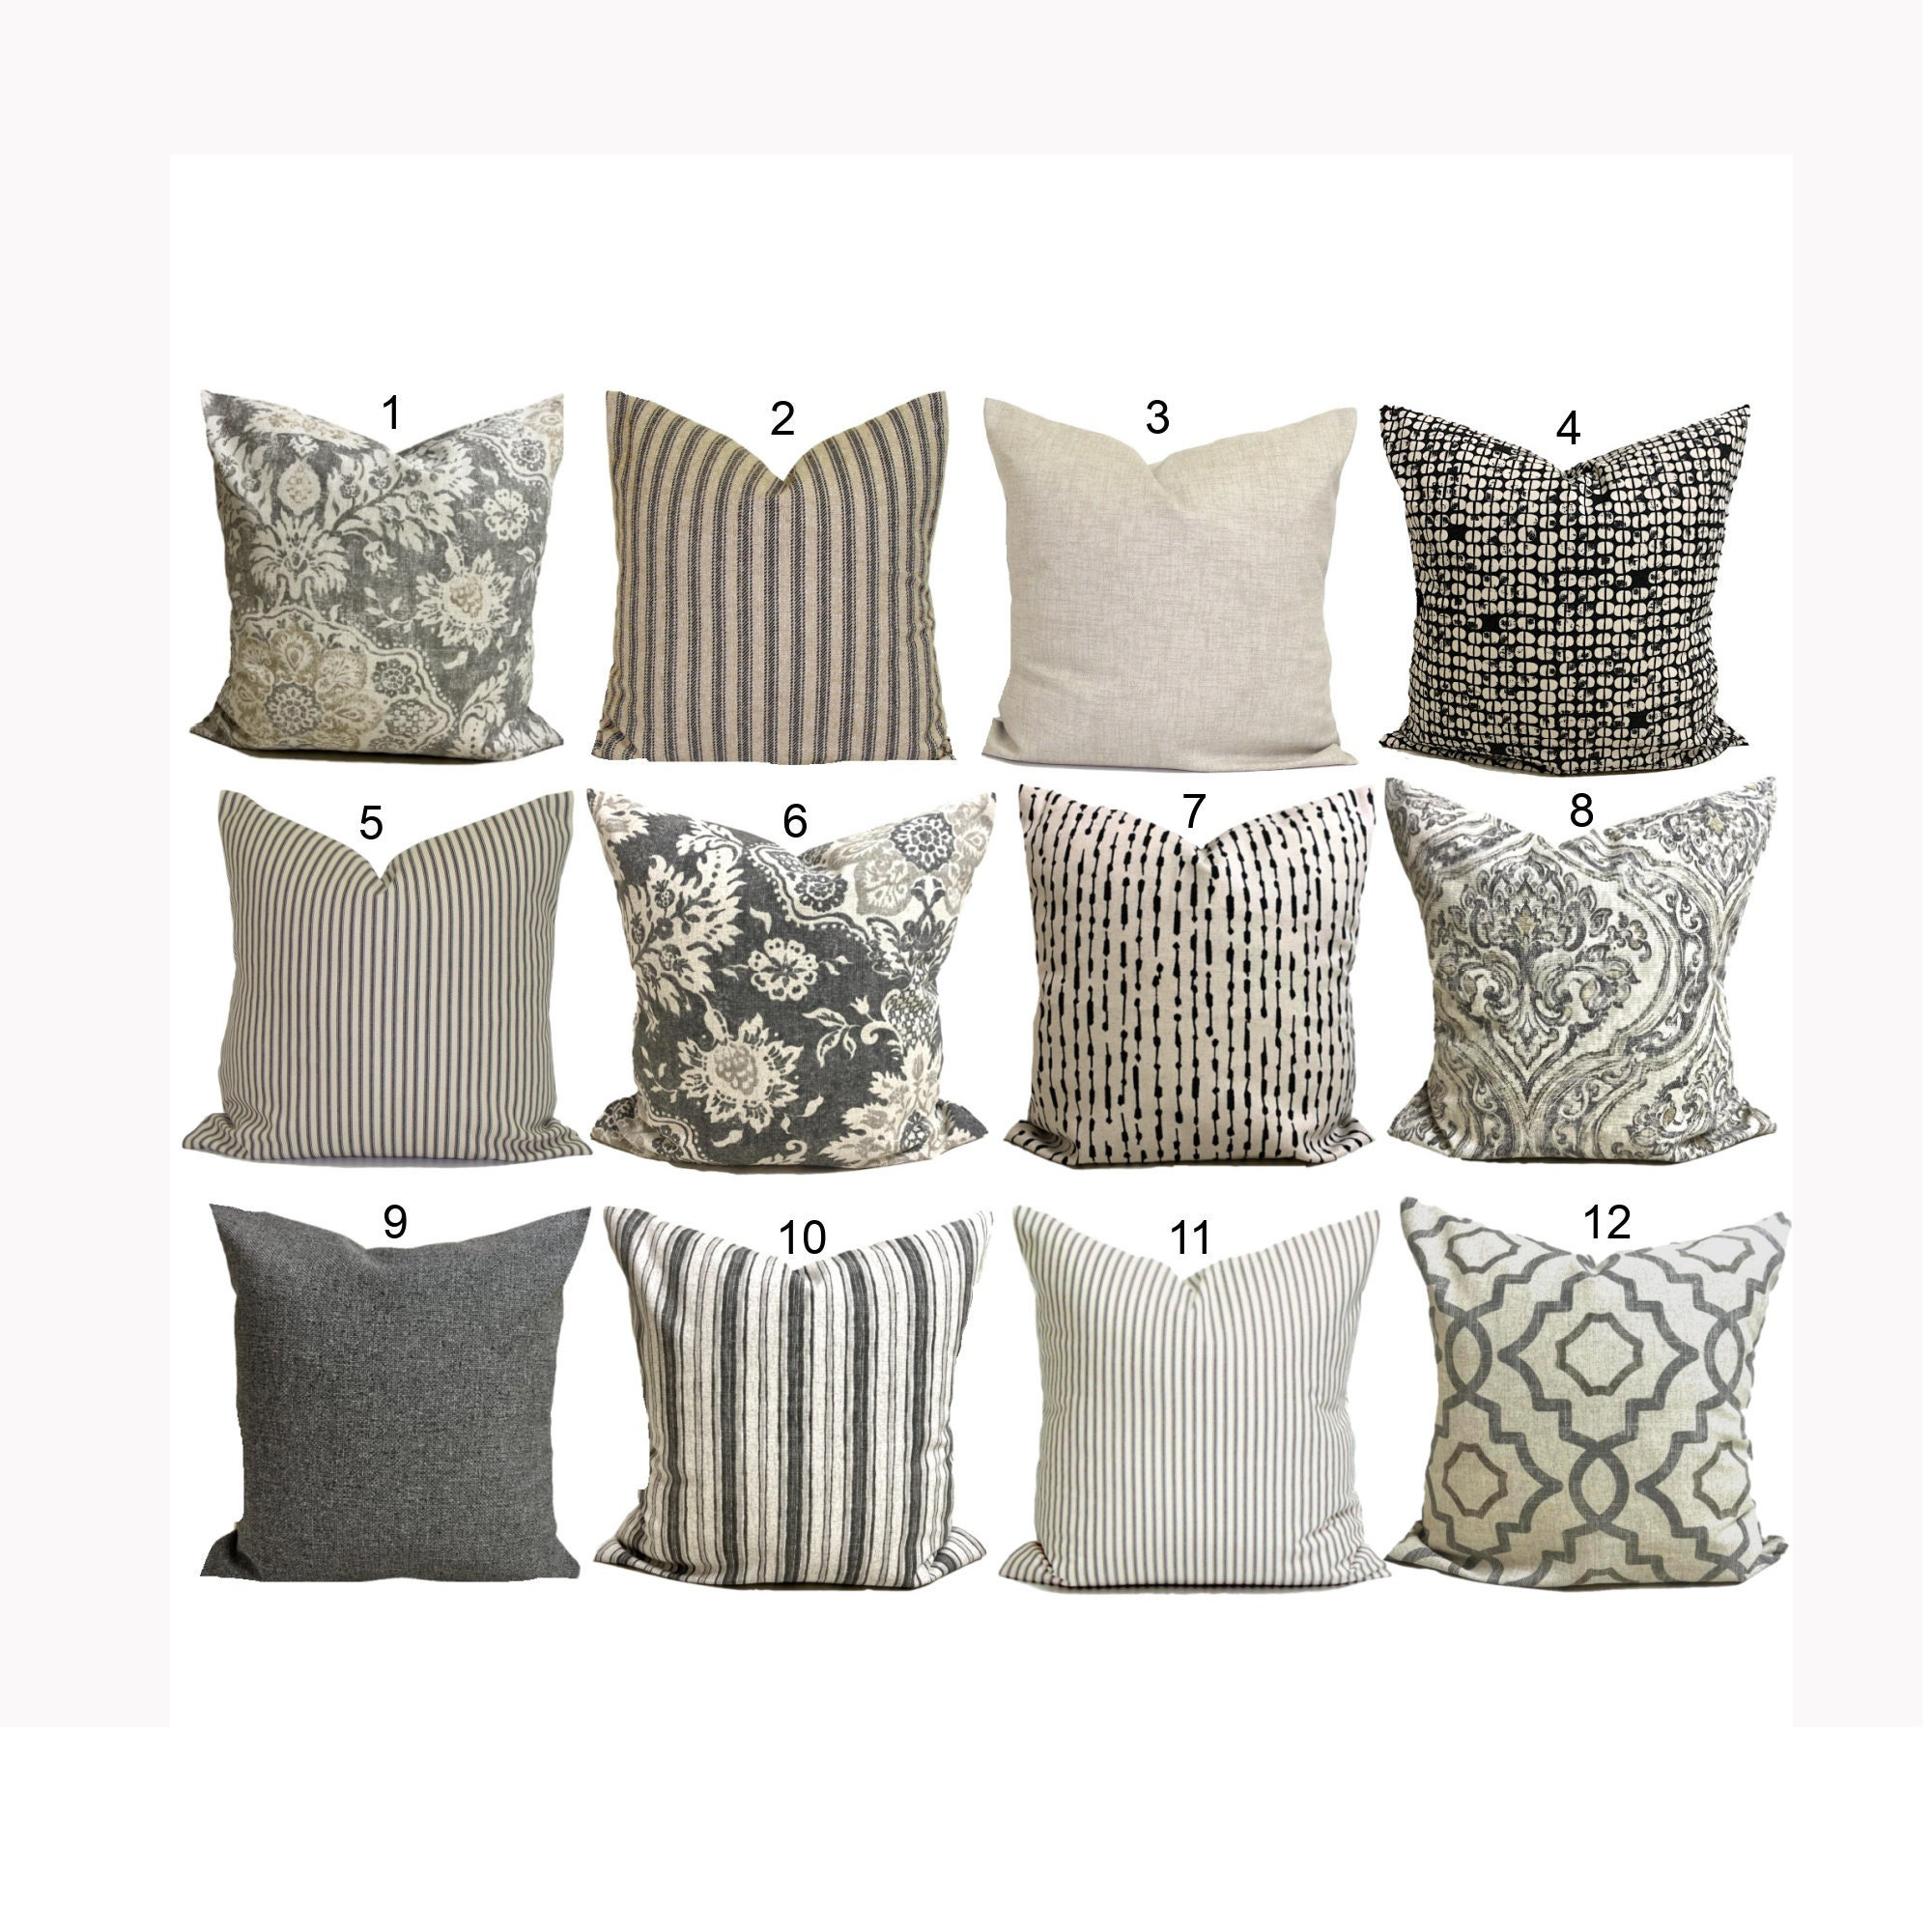 12 Best Christmas Pillows to Decorate a Cozy Holiday Home - VIV & TIM